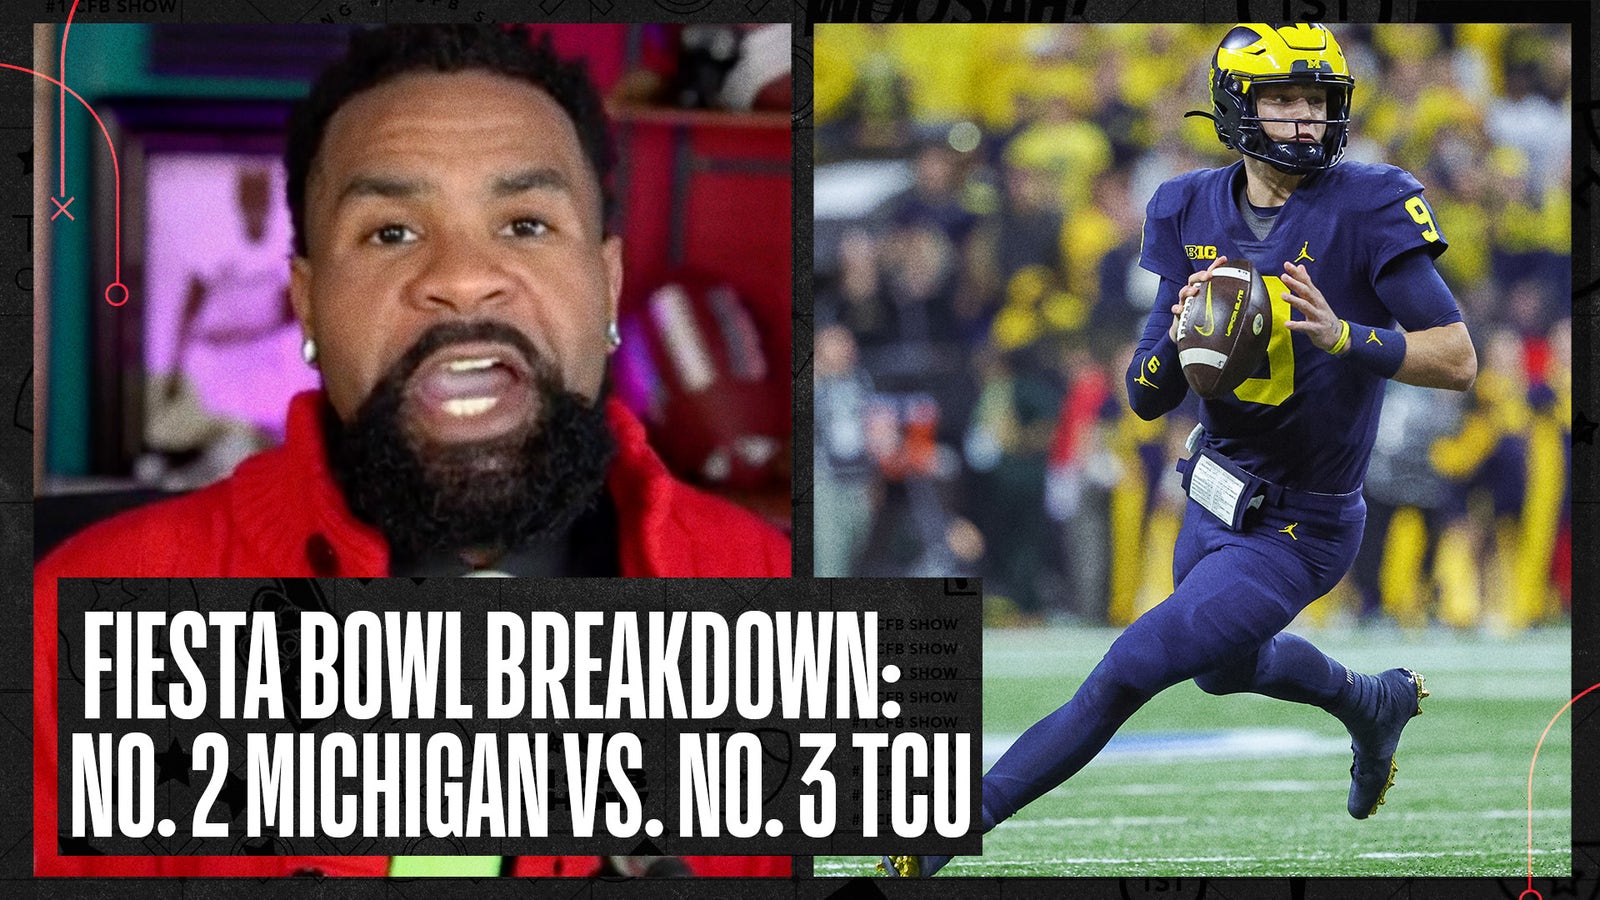 Fiesta Bowl preview: What's at stake for Michigan, TCU?